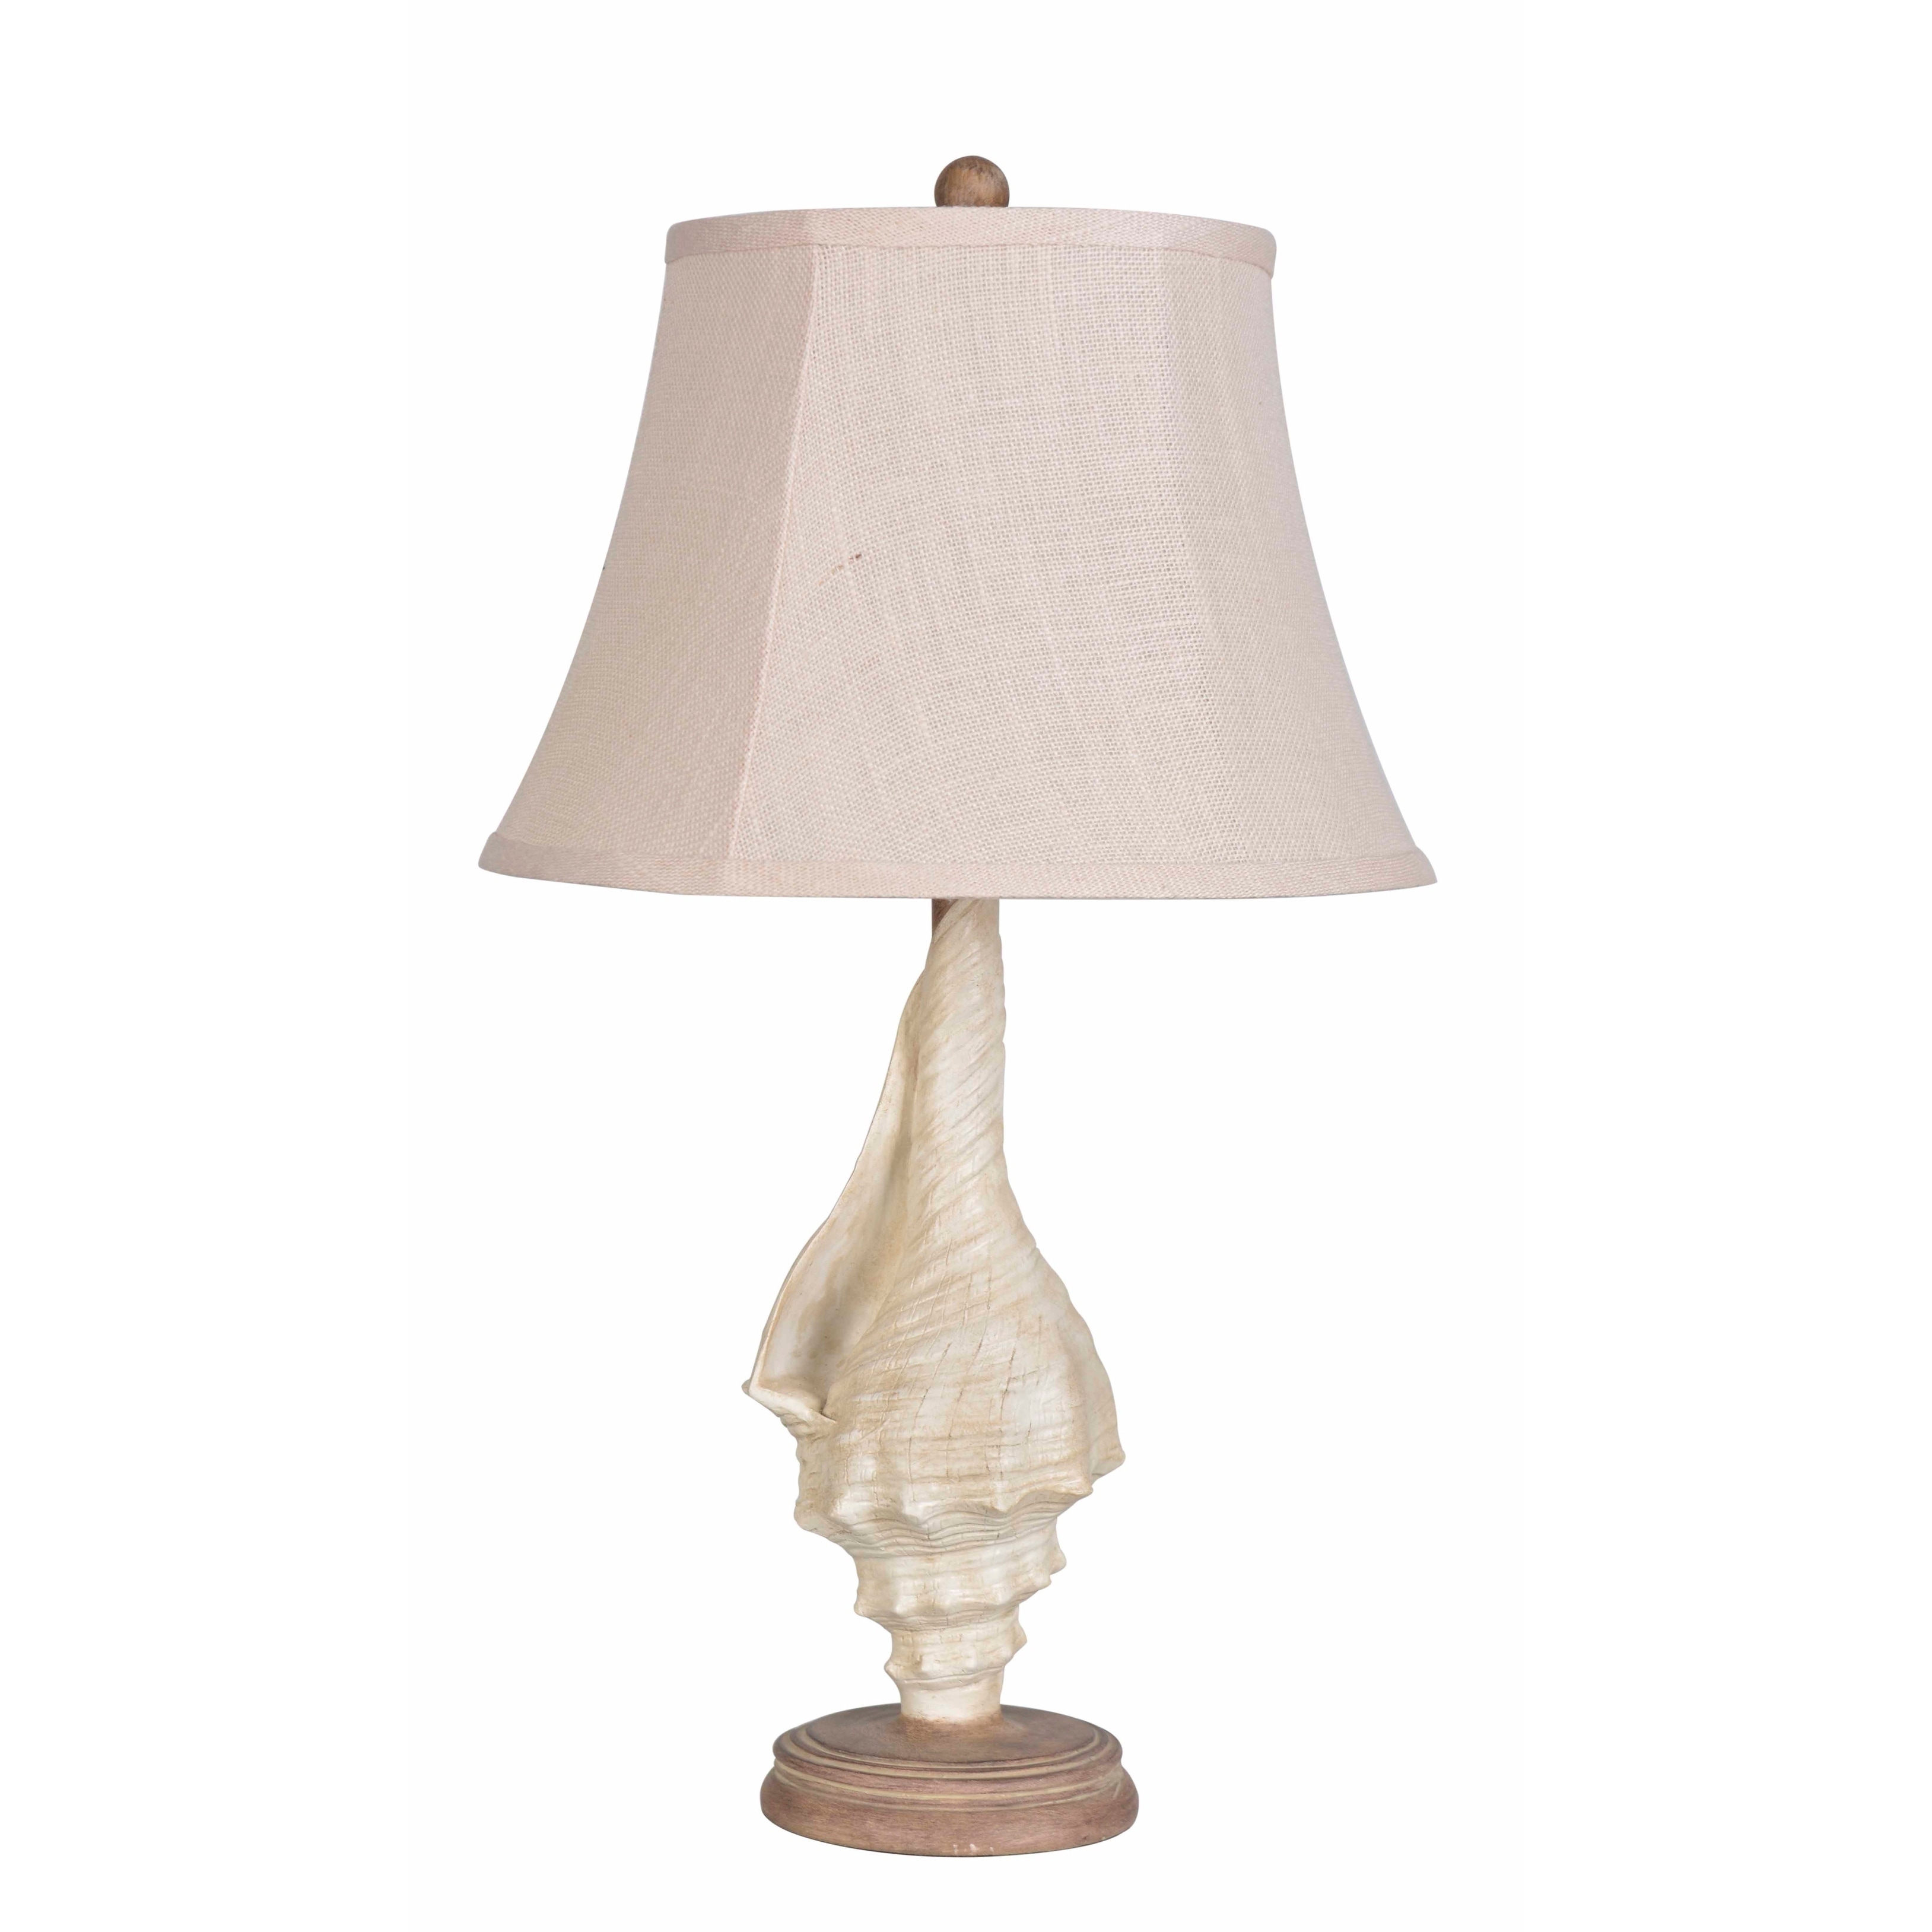 conch shell table lamp